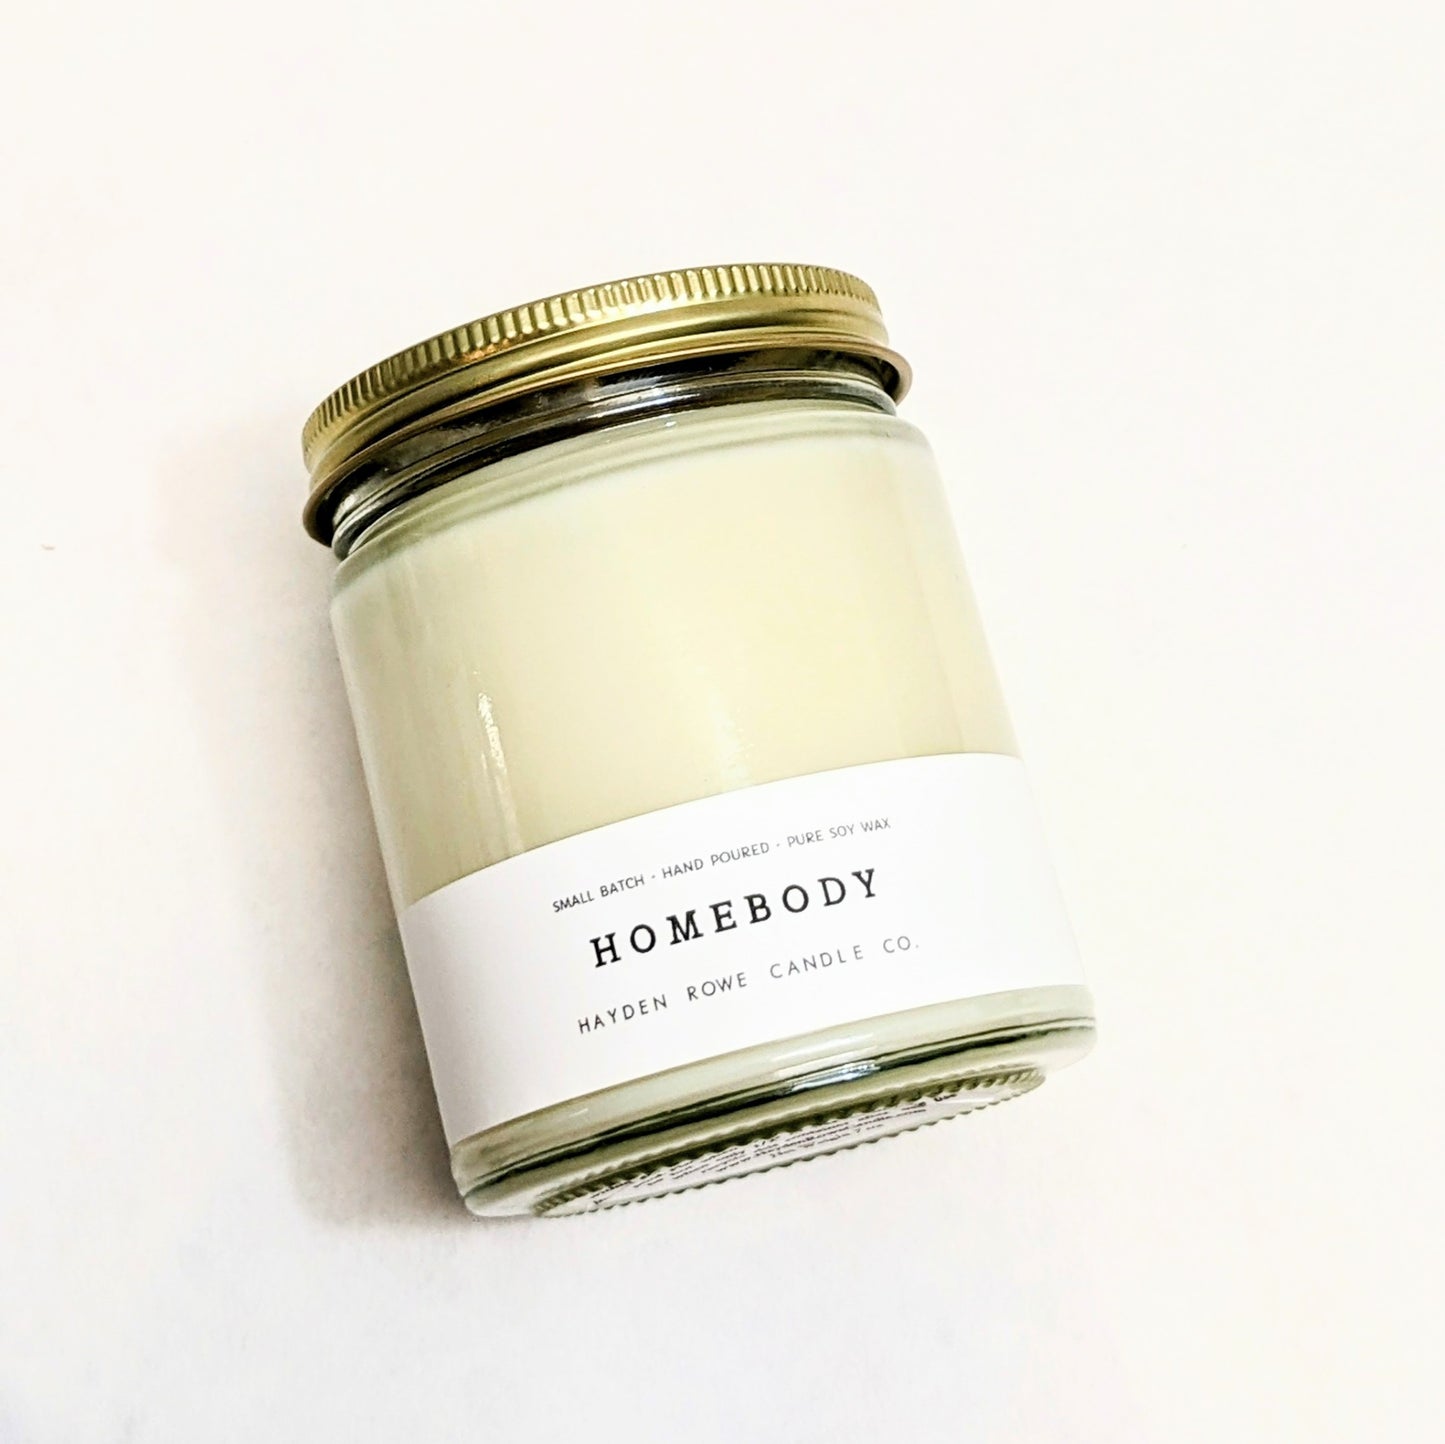 Homebody Soy Candle